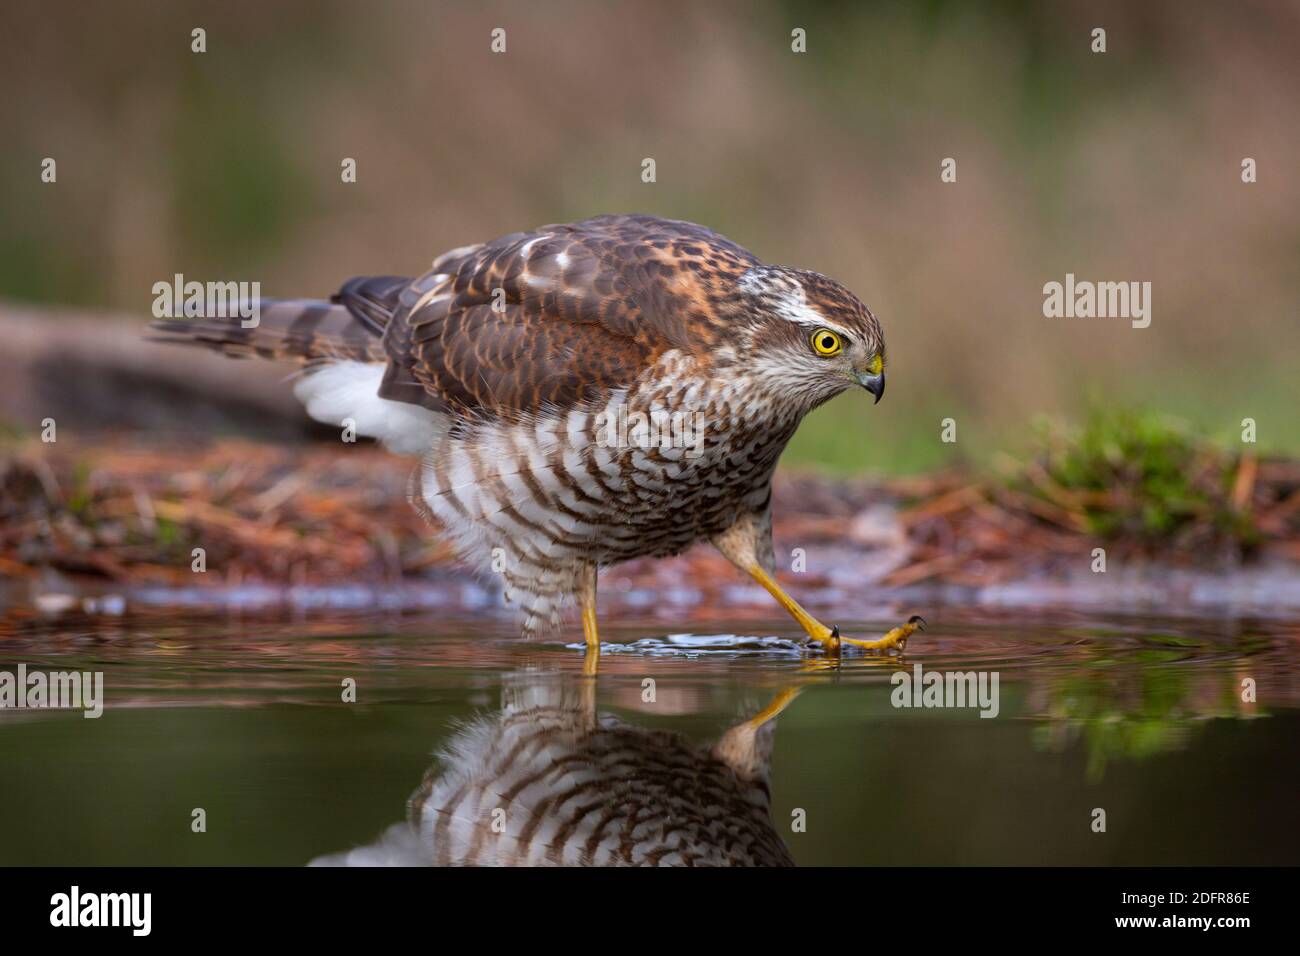 Young male Eurasian sparrowhawk (Accipiter nisus) walking through water Stock Photo